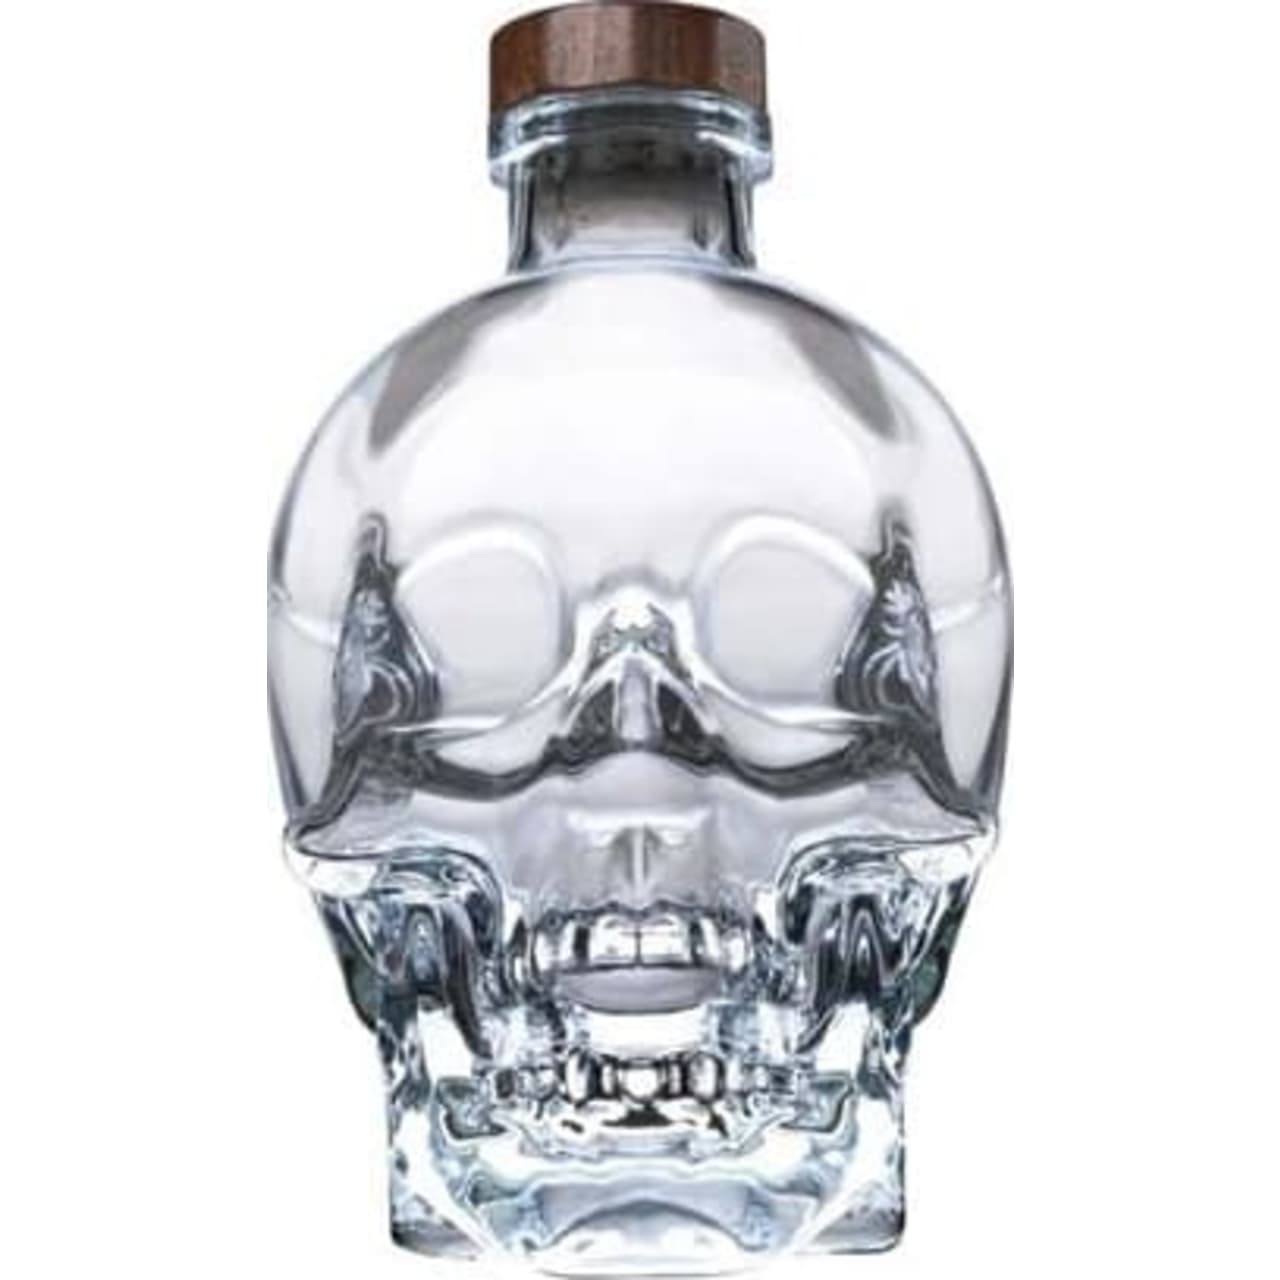 Crystal Head is distinctive due to its skull-shaped bottle, cut from Italian Bruni glass and inspired by the legend of the 13 crystal heads.